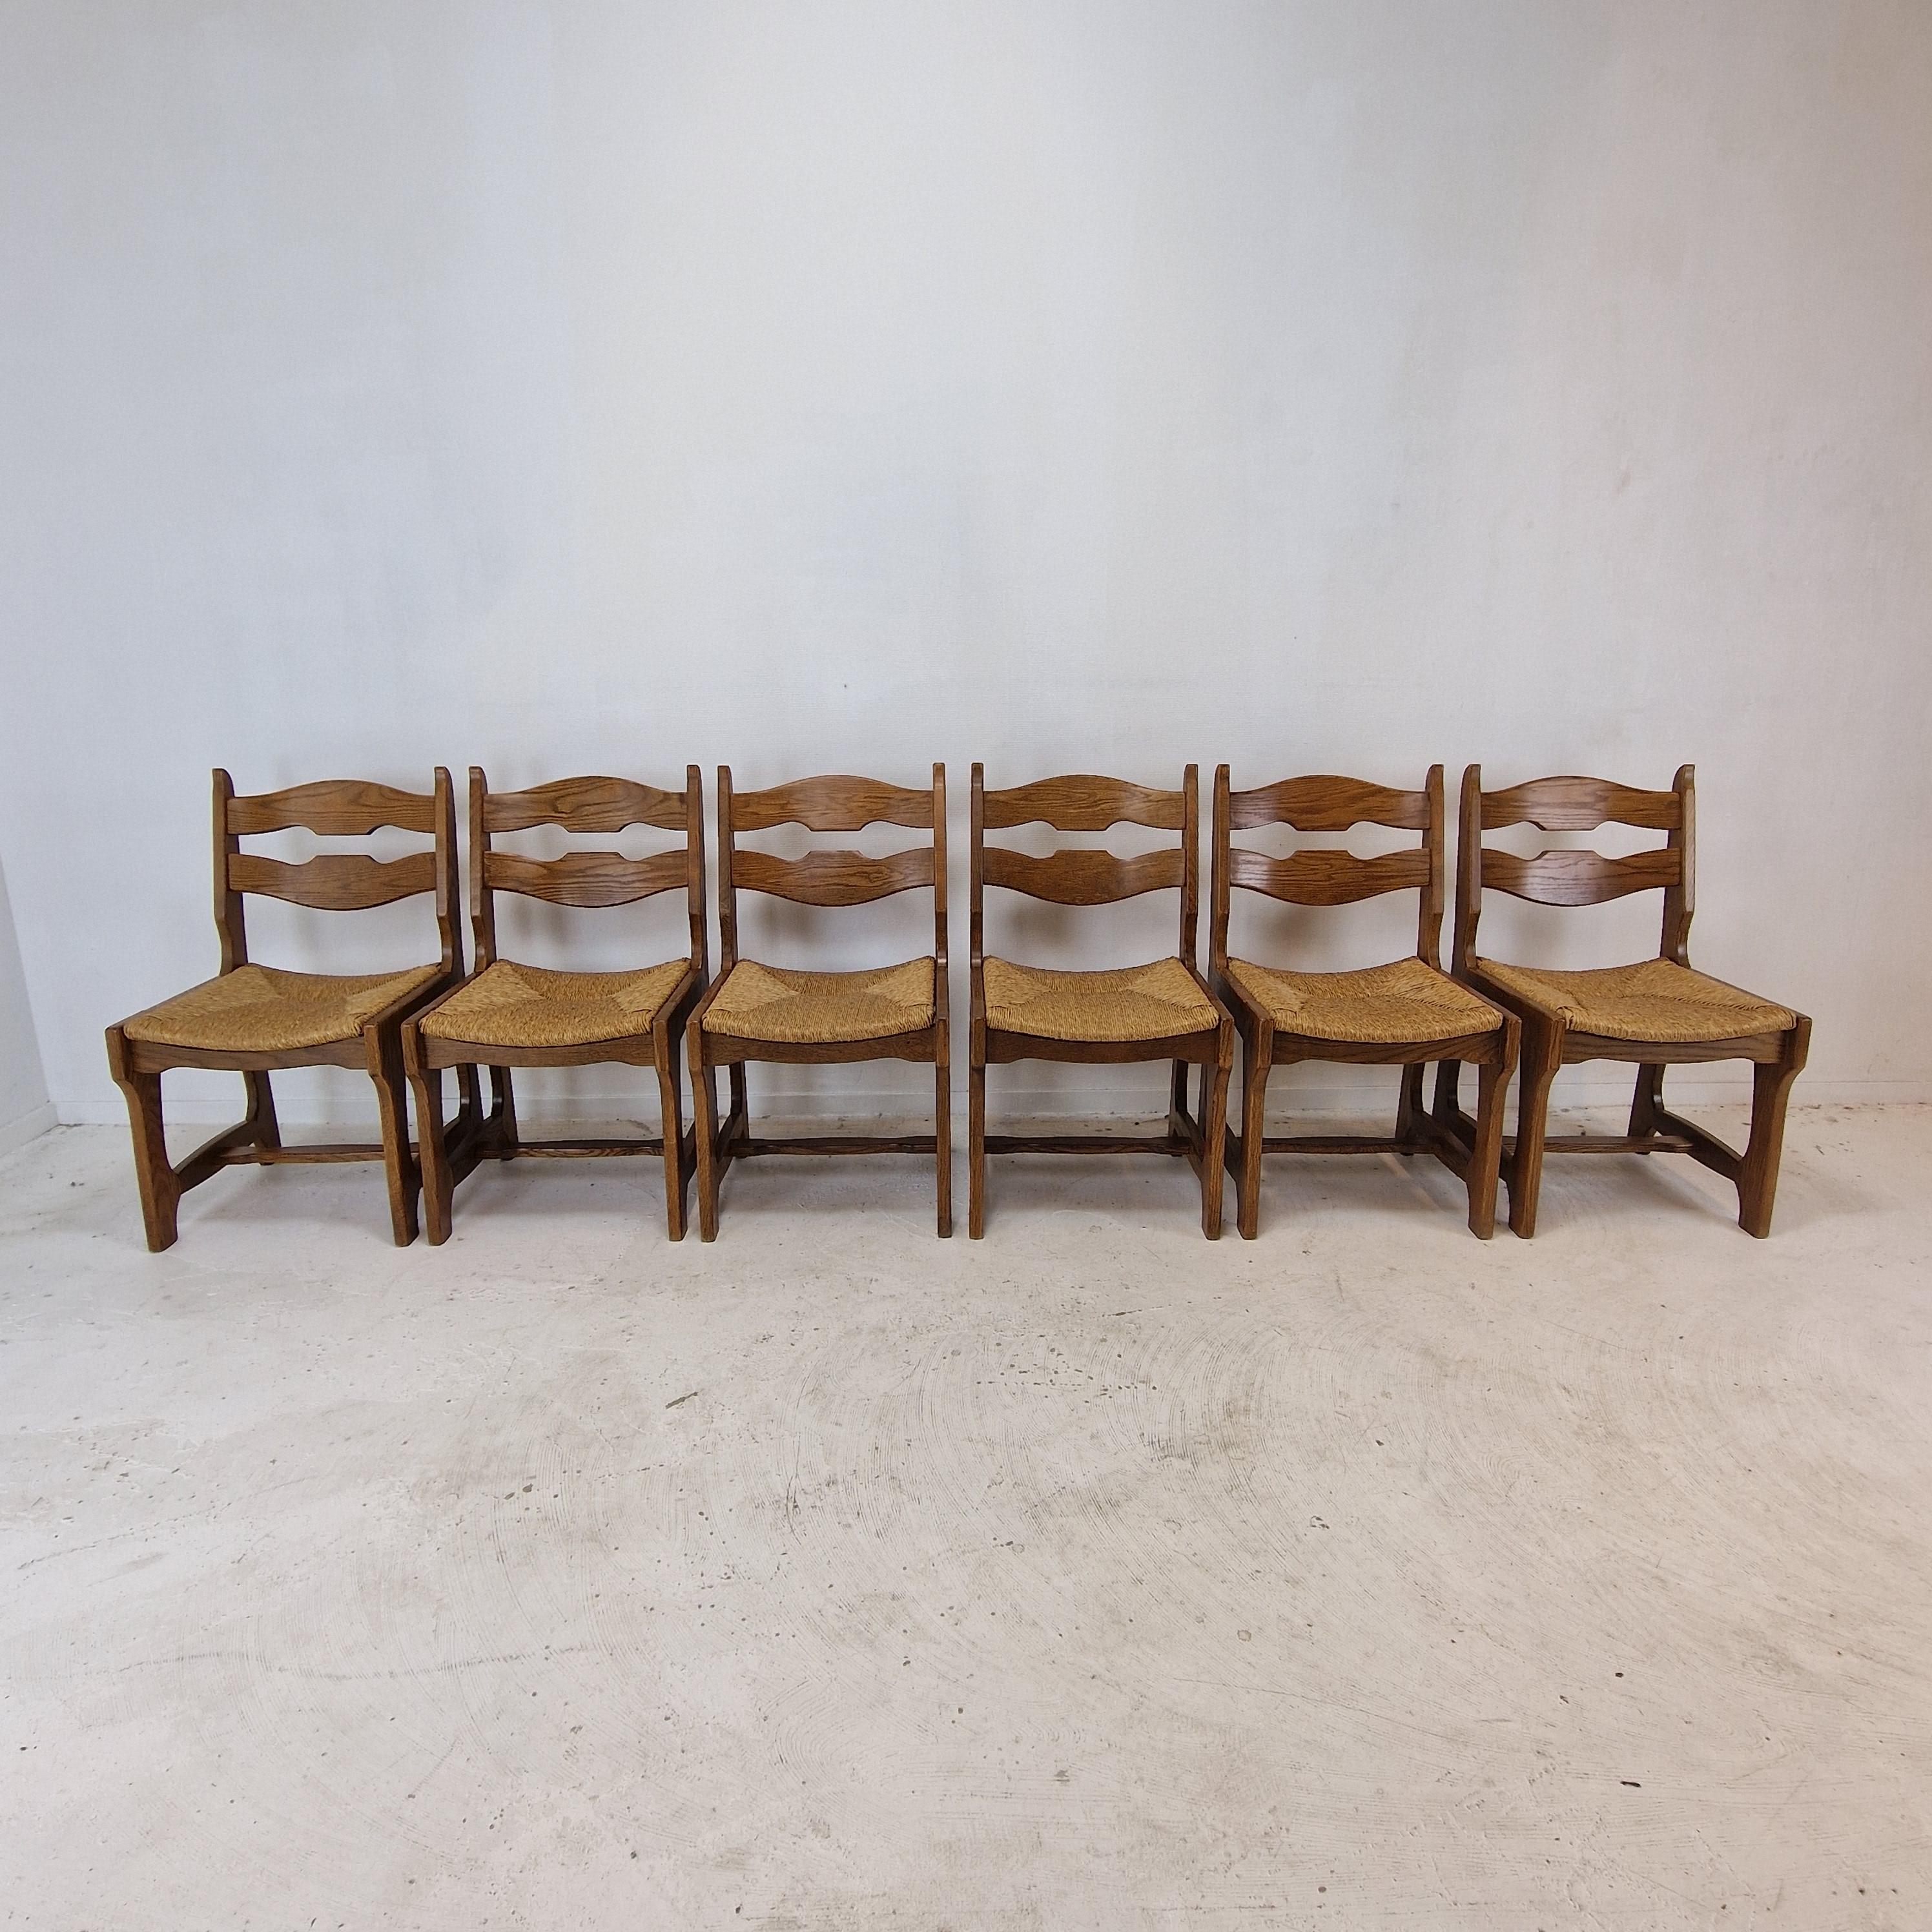 Very nice set of 6 brutalist oak dining chairs, made in France in the 60's.
These chairs are called razor blade chairs because of the shape of the back.
The seat is made of straw.

These chairs are attributed to Guillerme et Chambron.

They are made